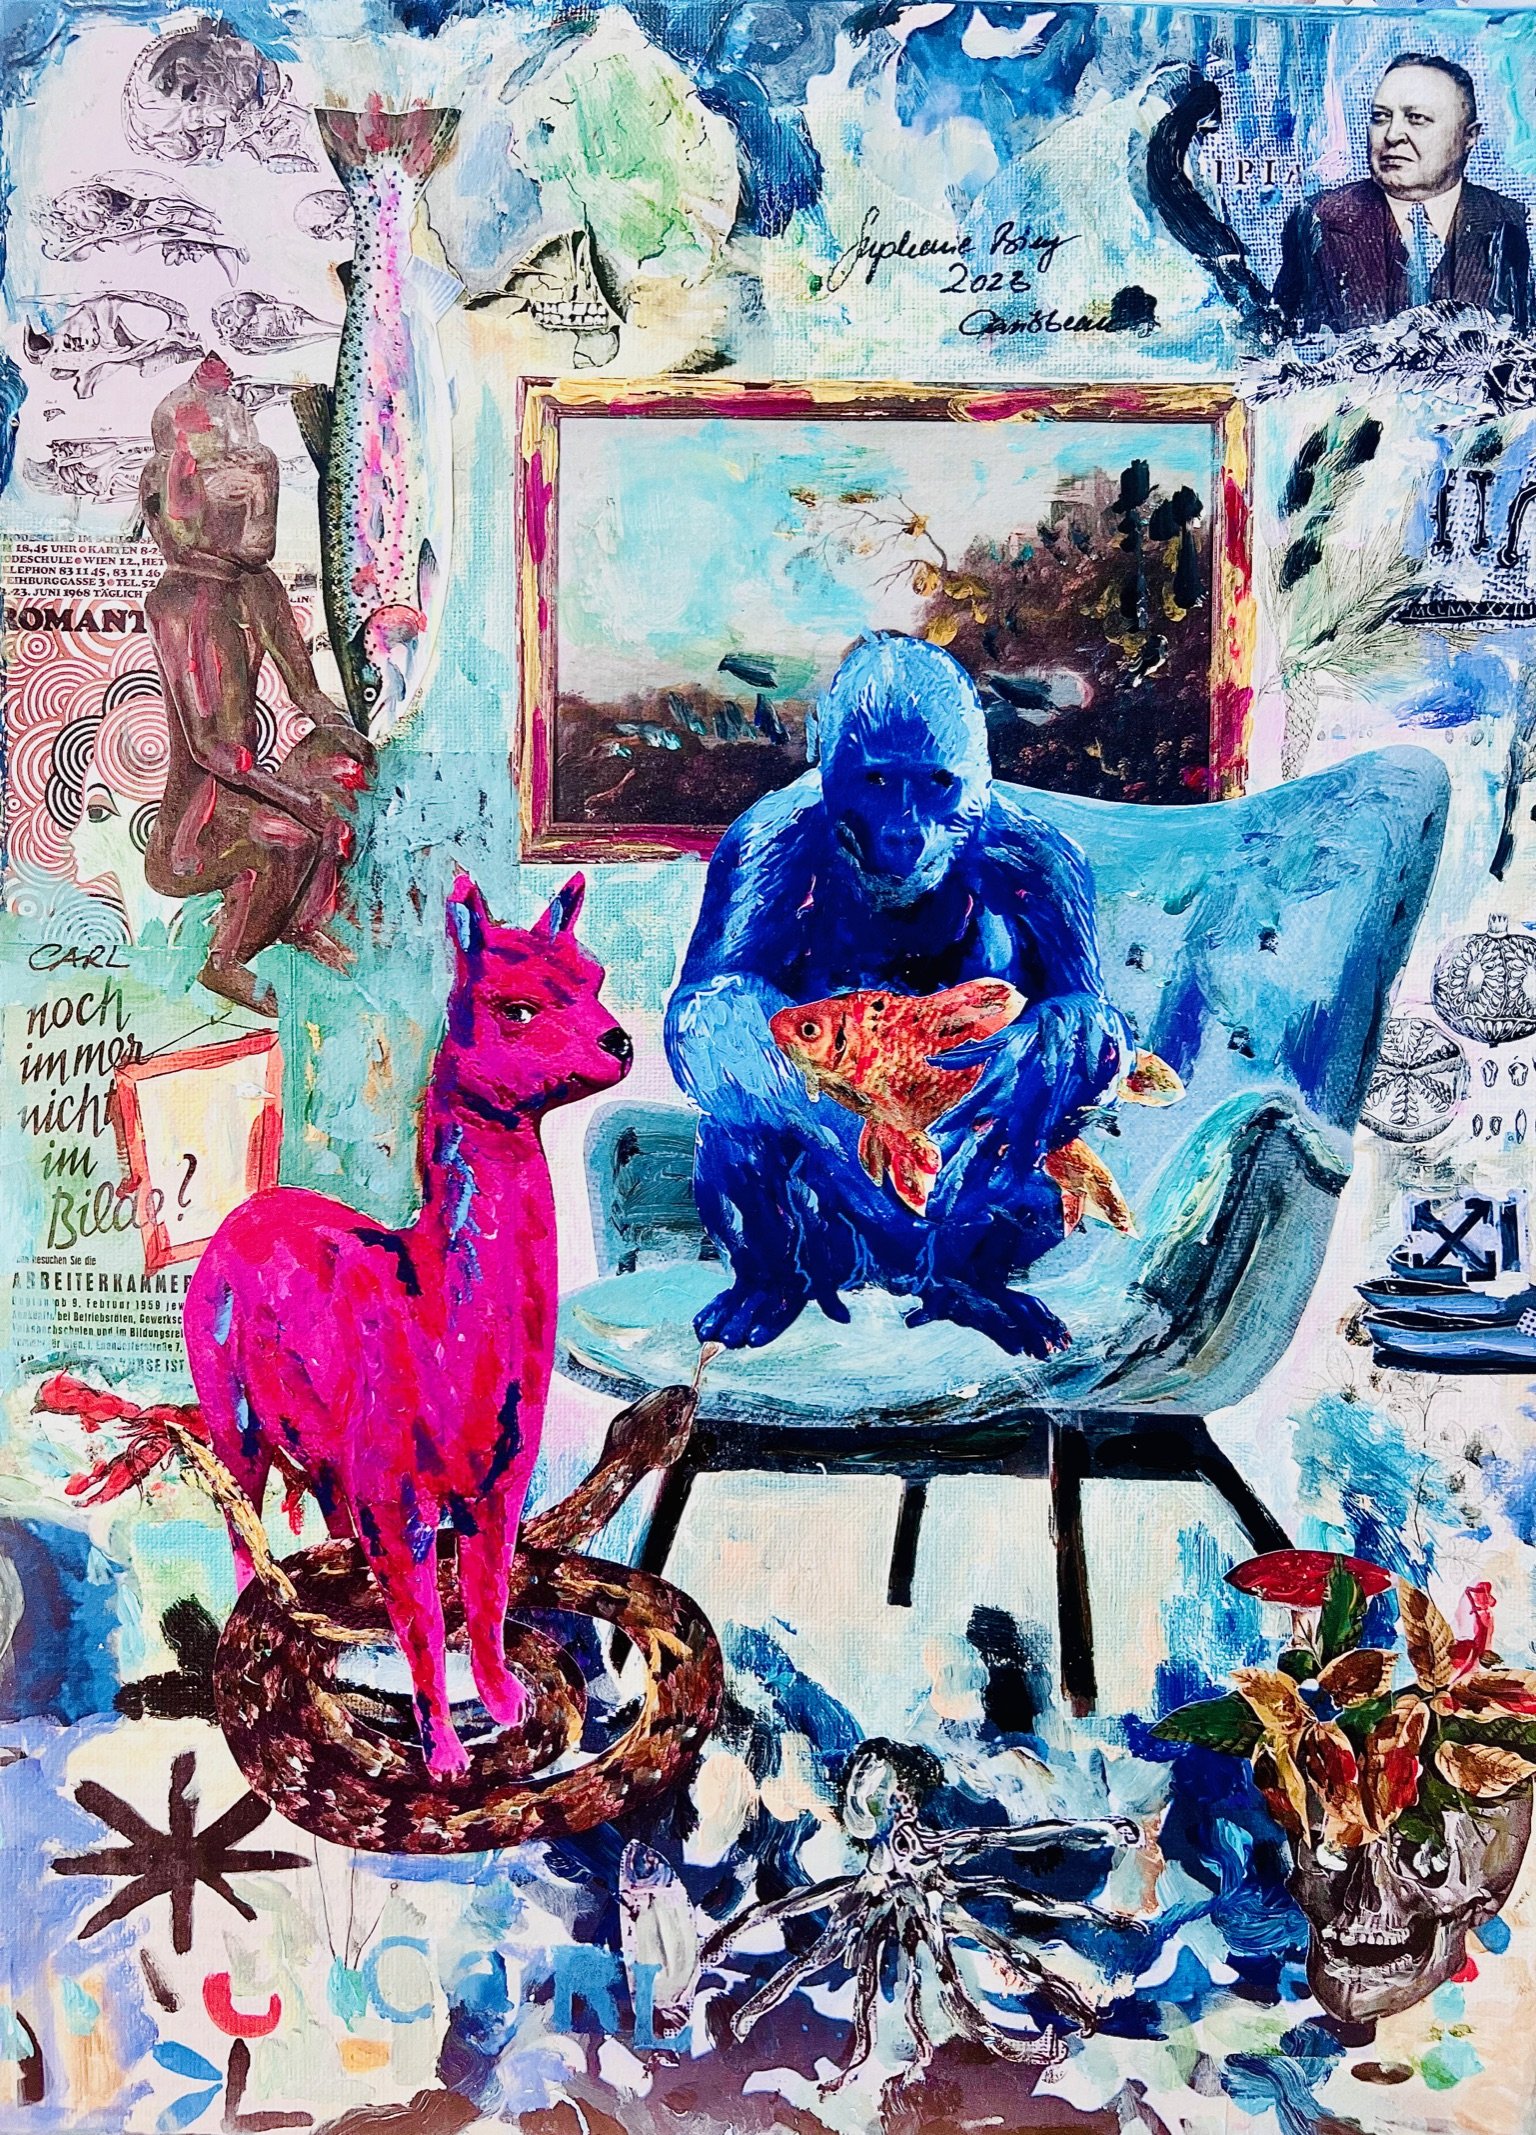 Blue Gorilla with Pink Lama and Carl 2023 Print on Canvas signed 1 von 200 80x60cm €1400.JPG